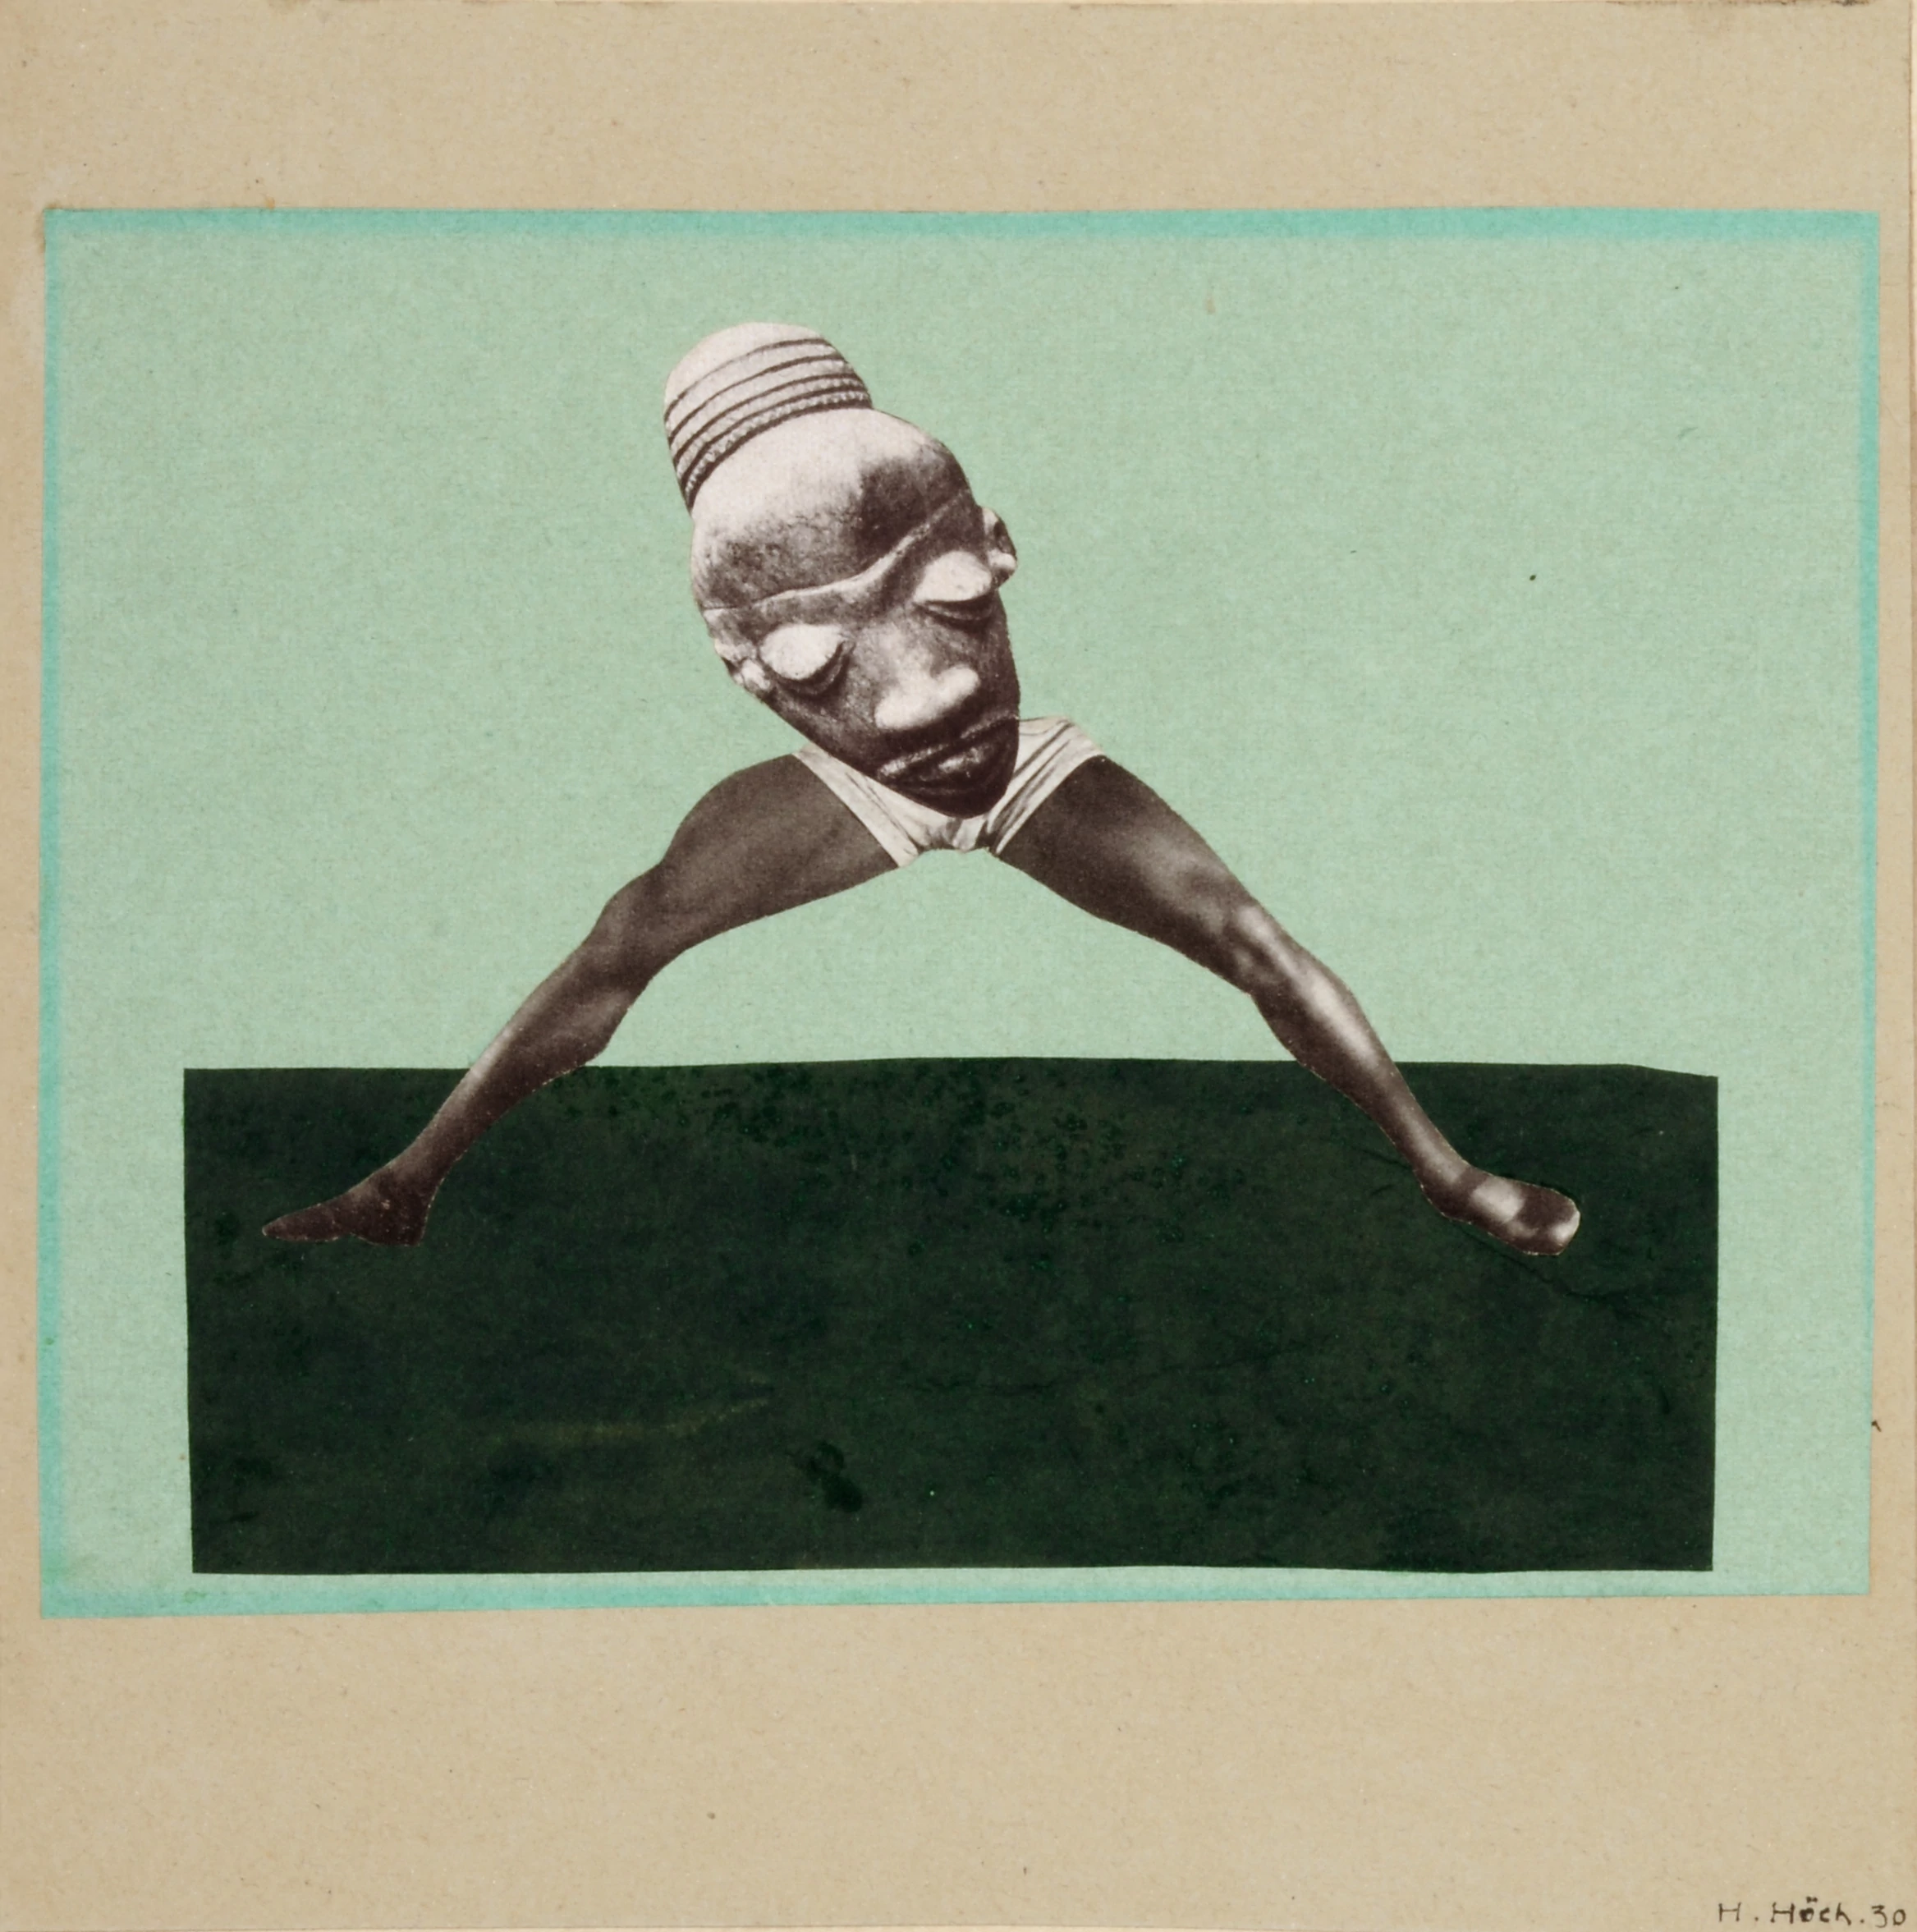 Untitled, from an Ethnographic Museum, Hannah Höch